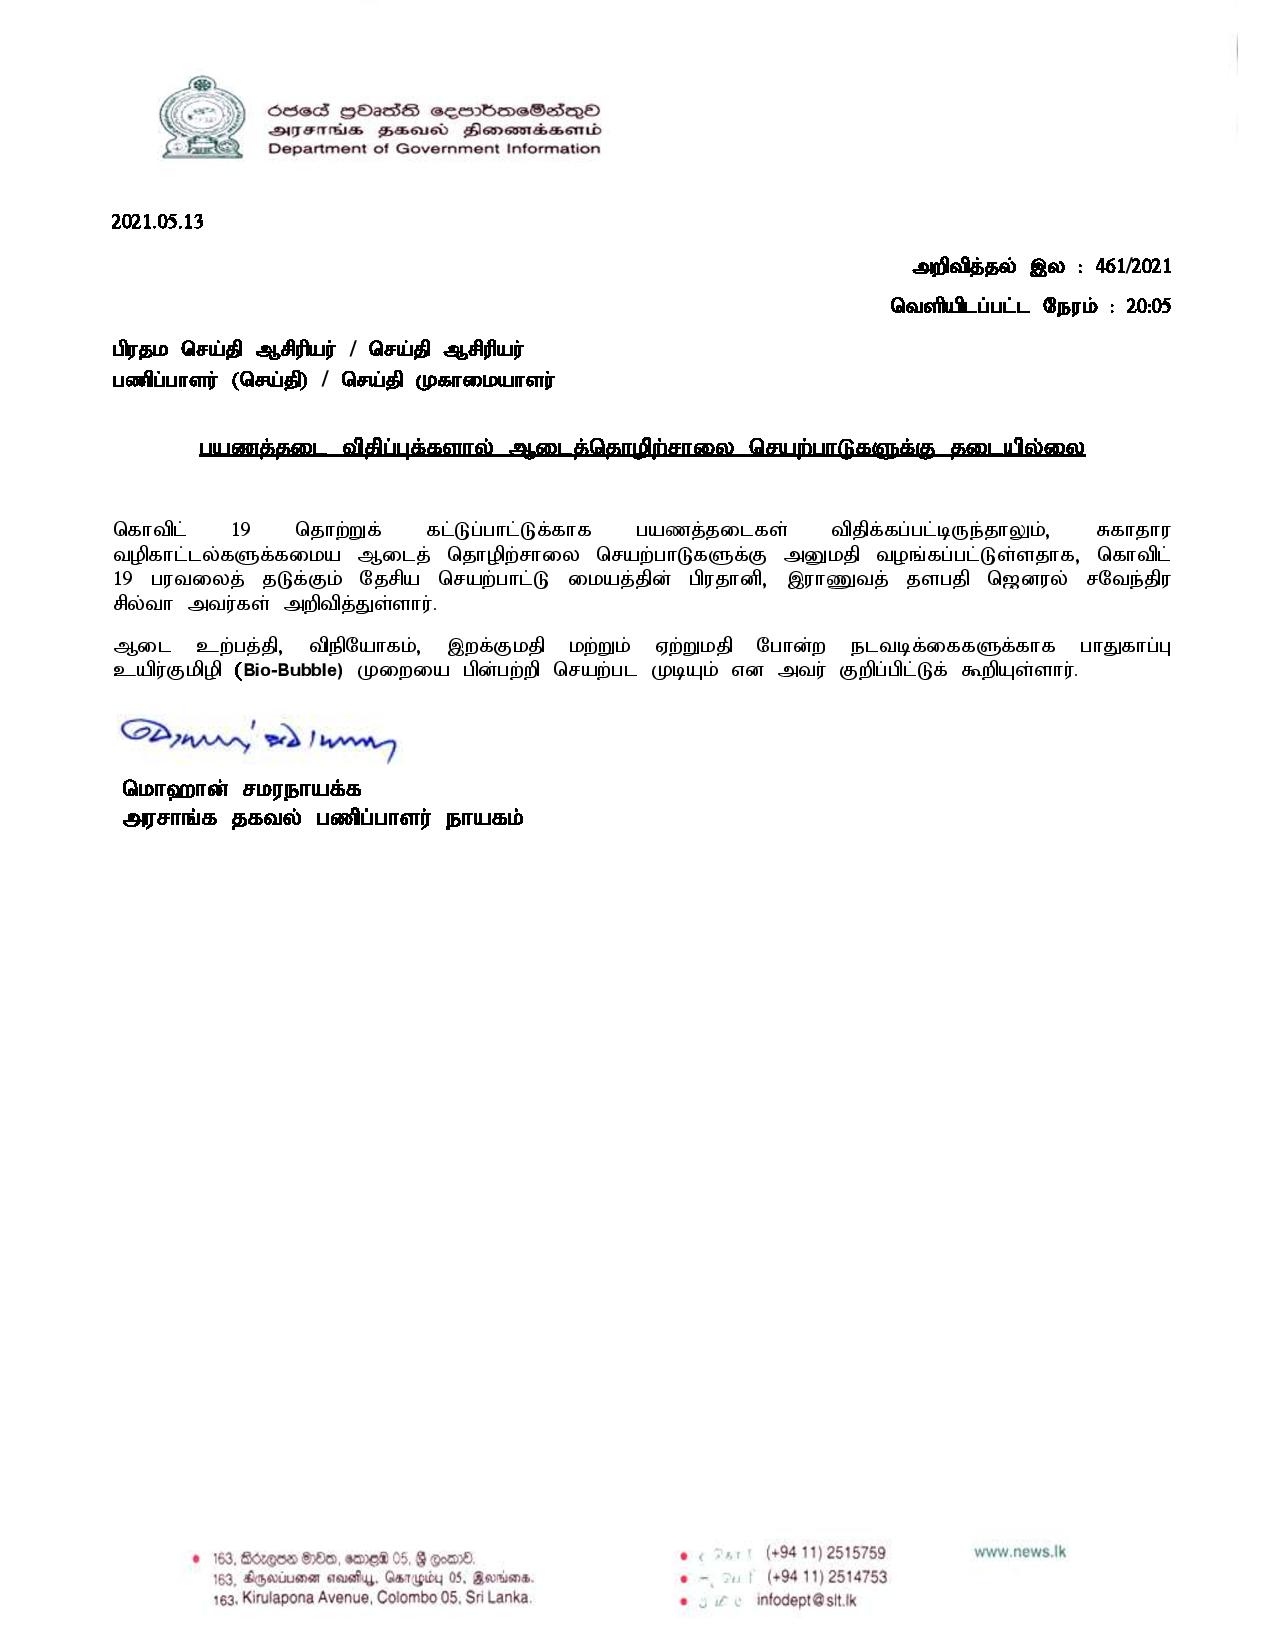 Release No 461 Tamil page 001